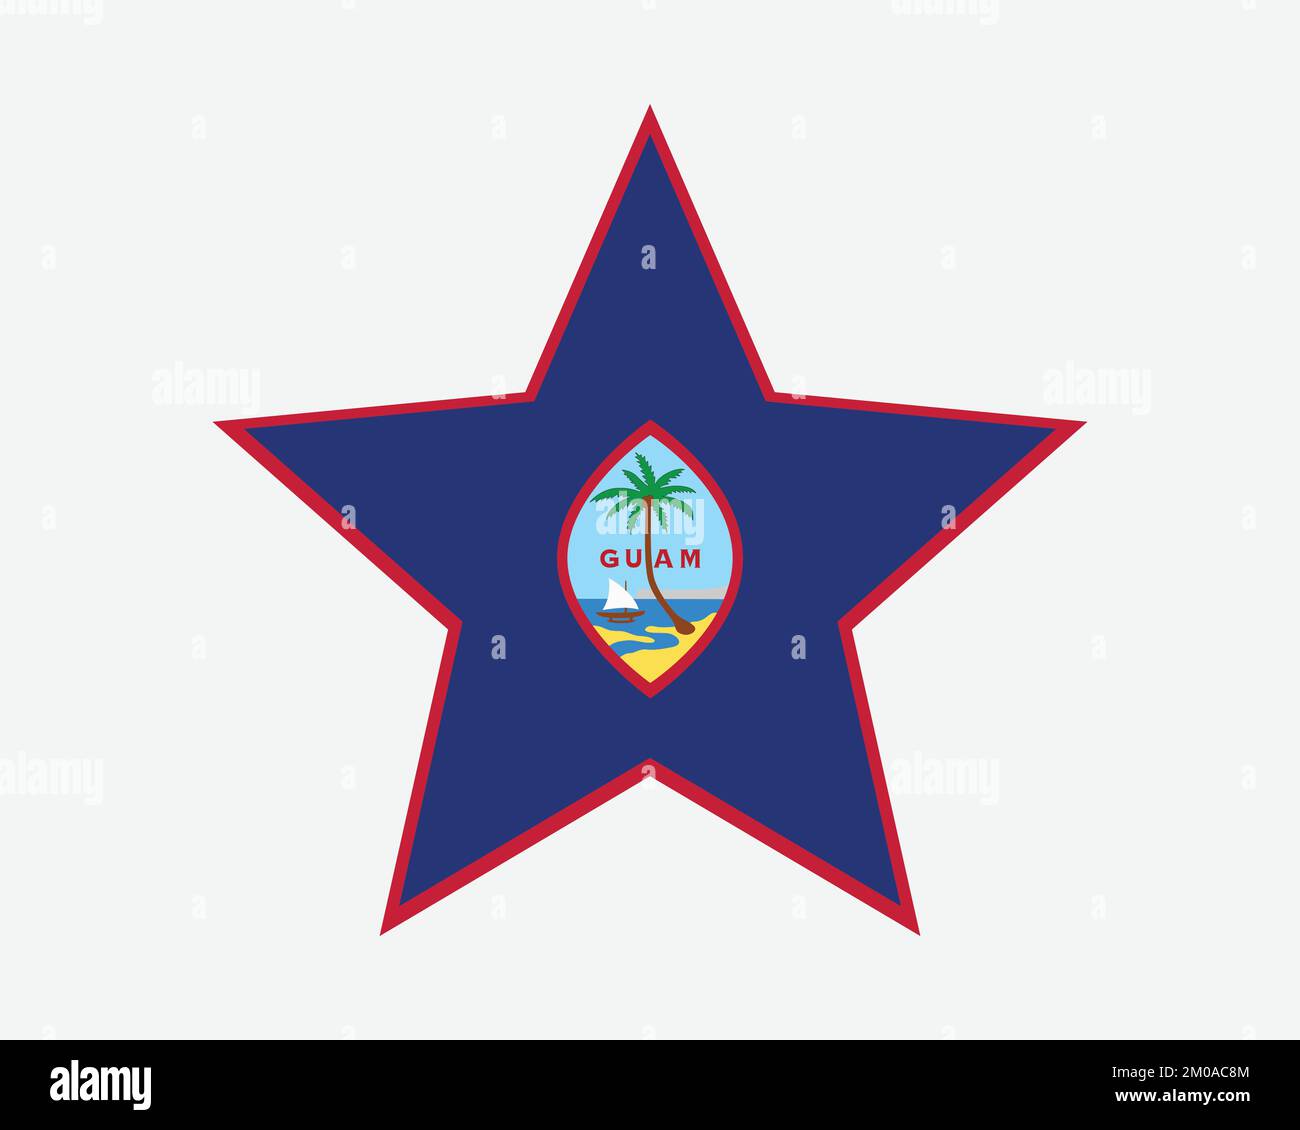 Guam Star Flag. Guamanian Star Shape Flag. Unincorporated and Organized US USA Territory Banner Icon Symbol Vector Flat Artwork Graphic Illustration Stock Vector